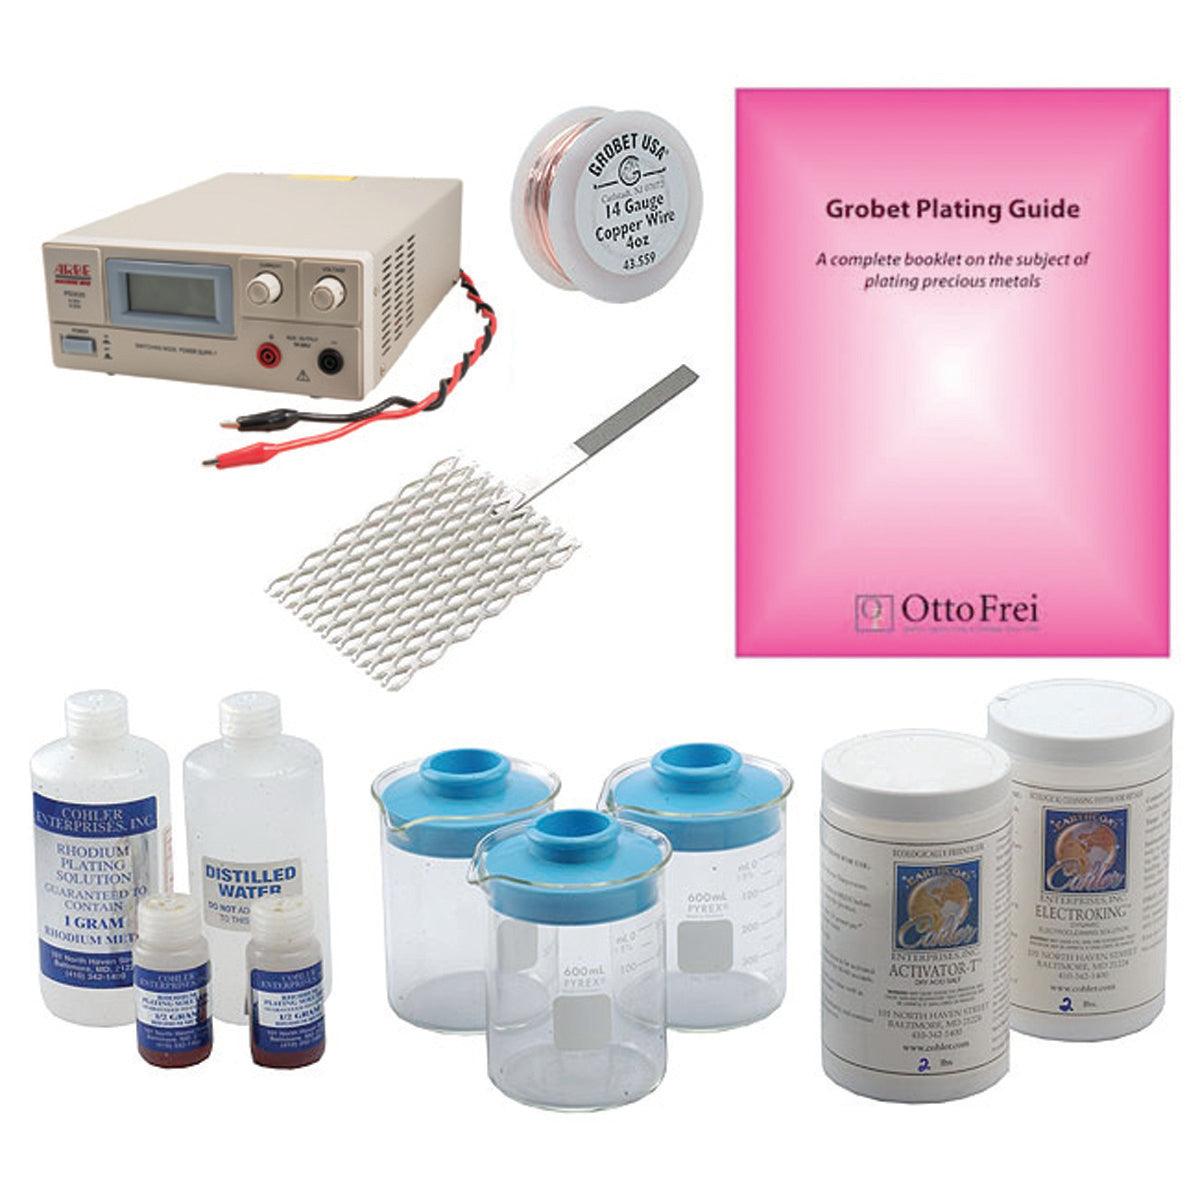 Rhodium Plating Solution Kit - Findings Outlet